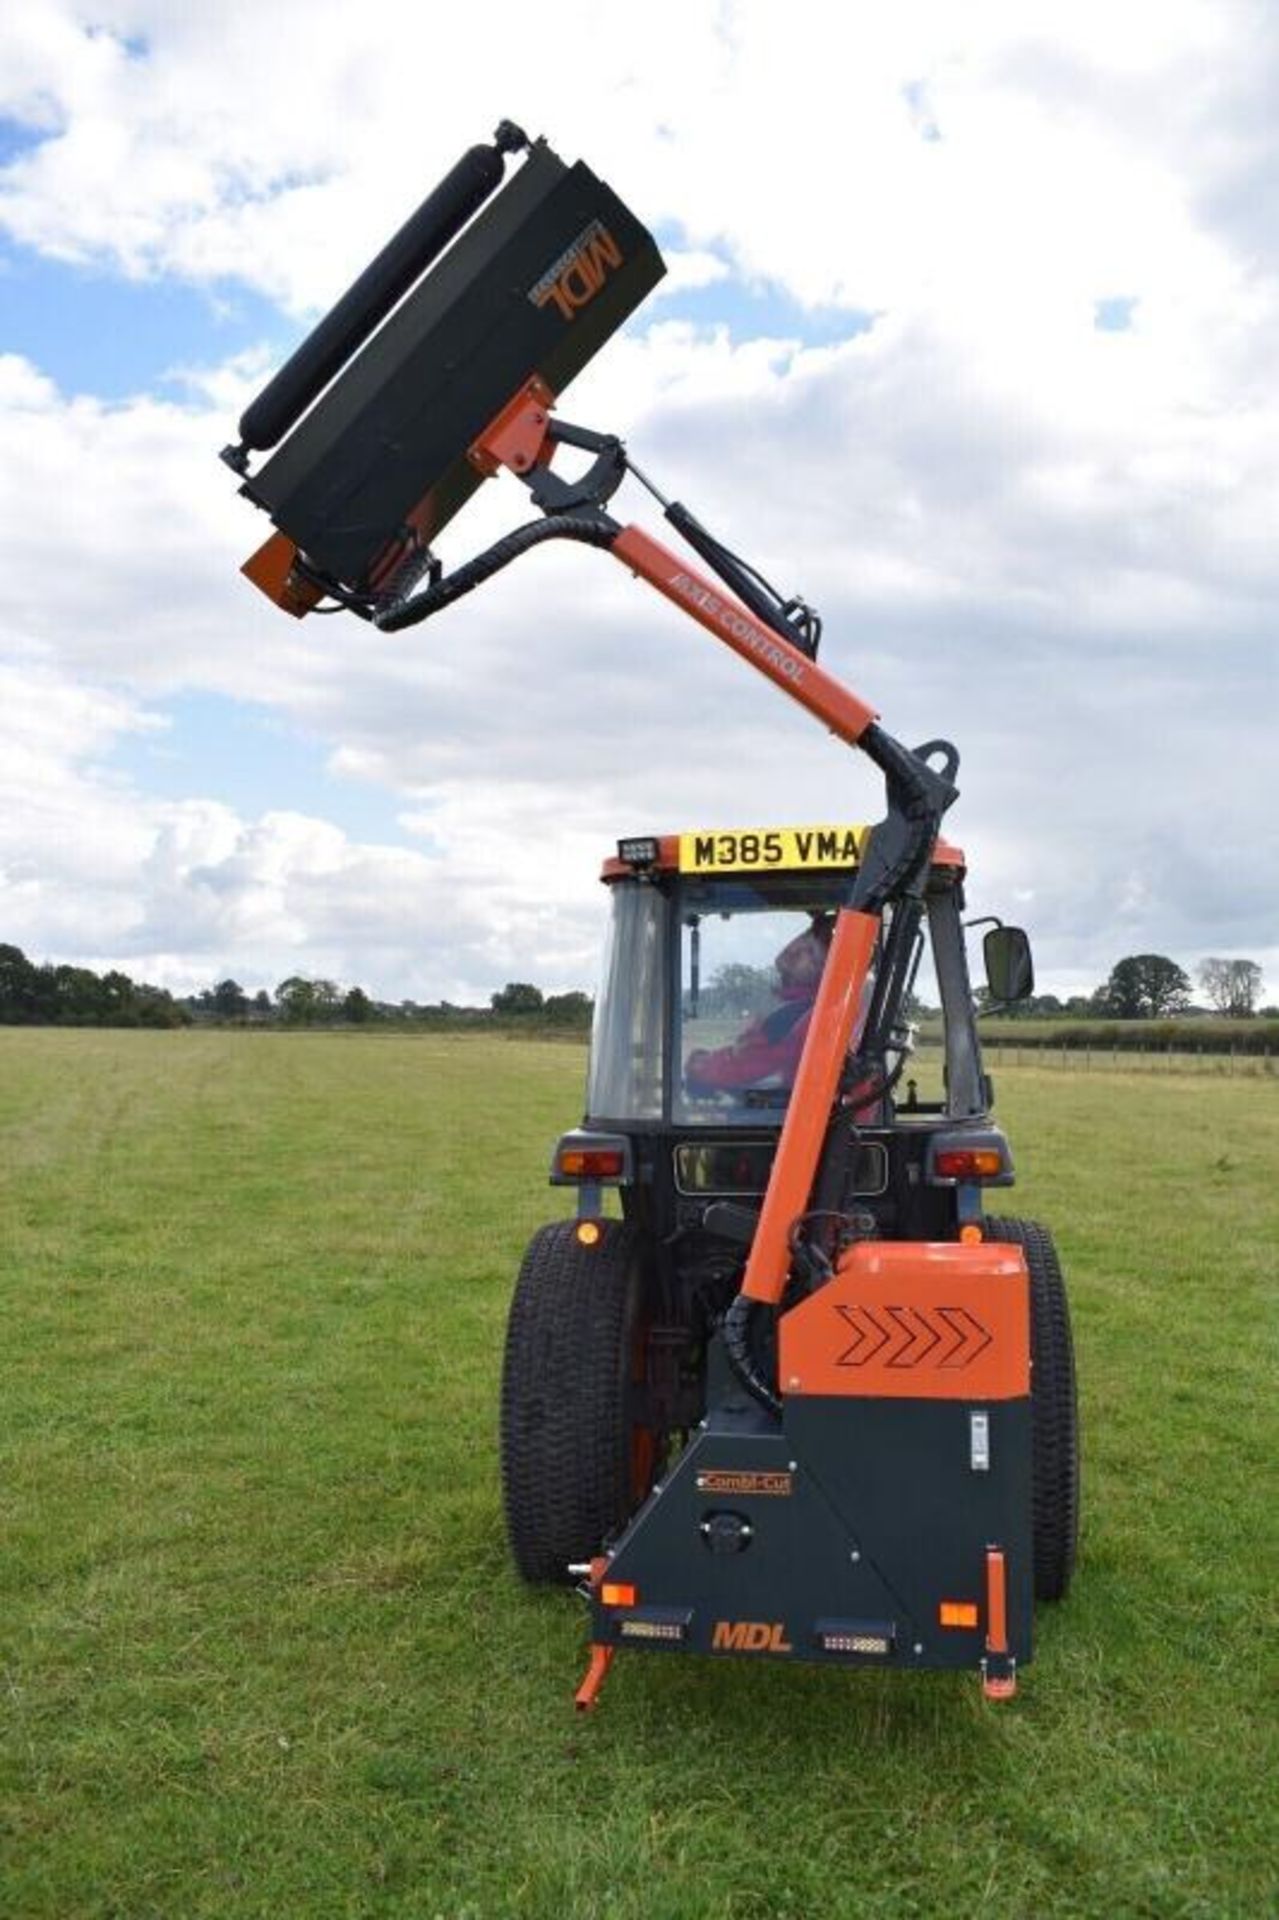 BRITISH PRECISION: ECOMBI CUT 100CM JOYSTICK HEDGE CUTTER FOR SEAMLESS TRIMMING - Image 3 of 11